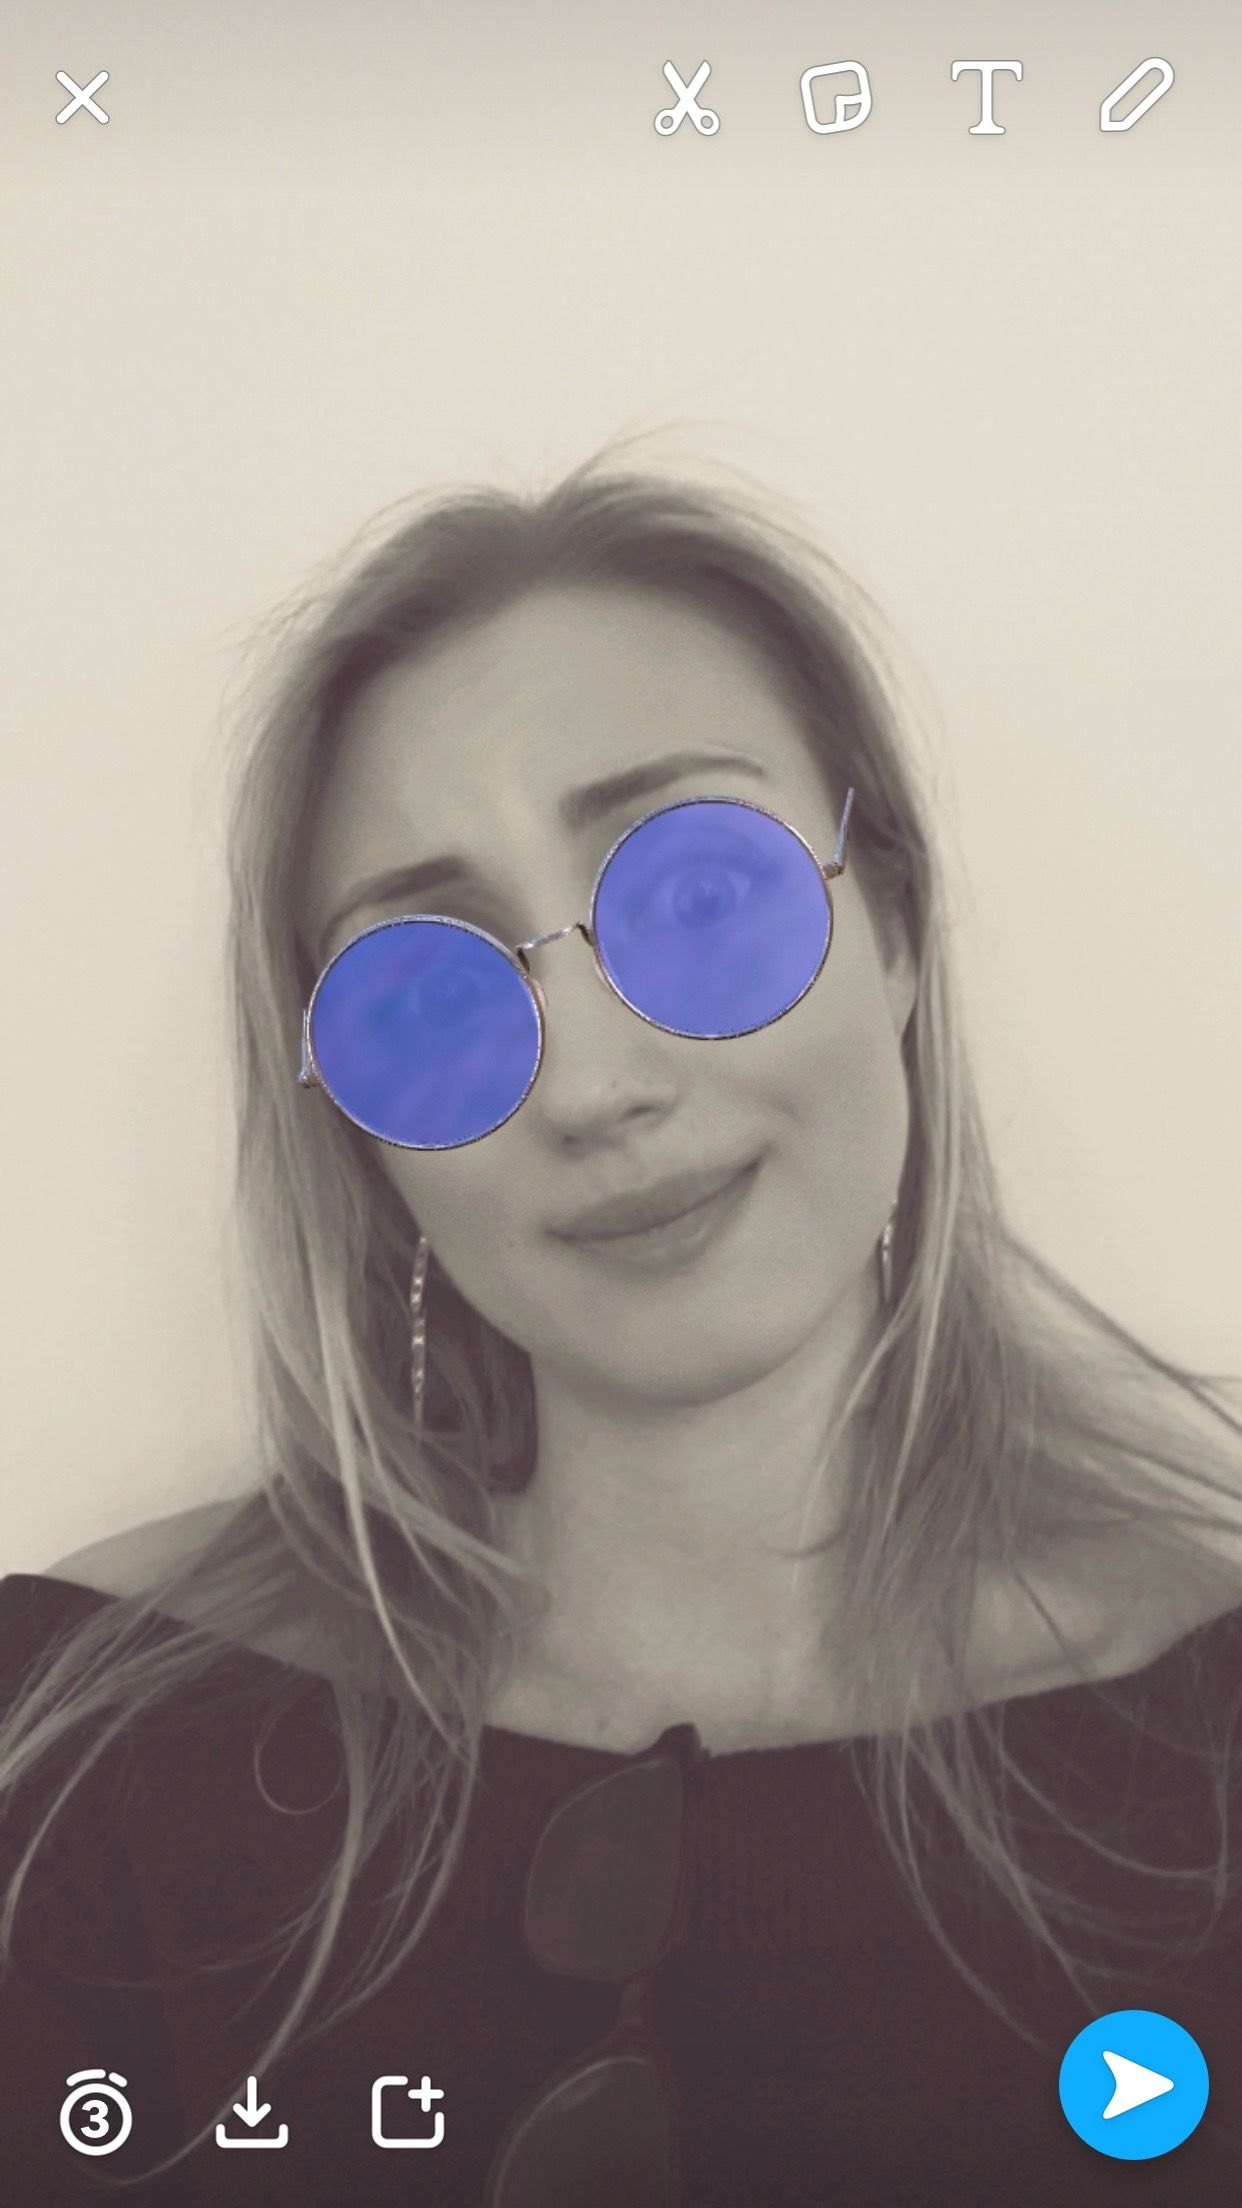 best snapchat filter for you, based on your zodiac sign